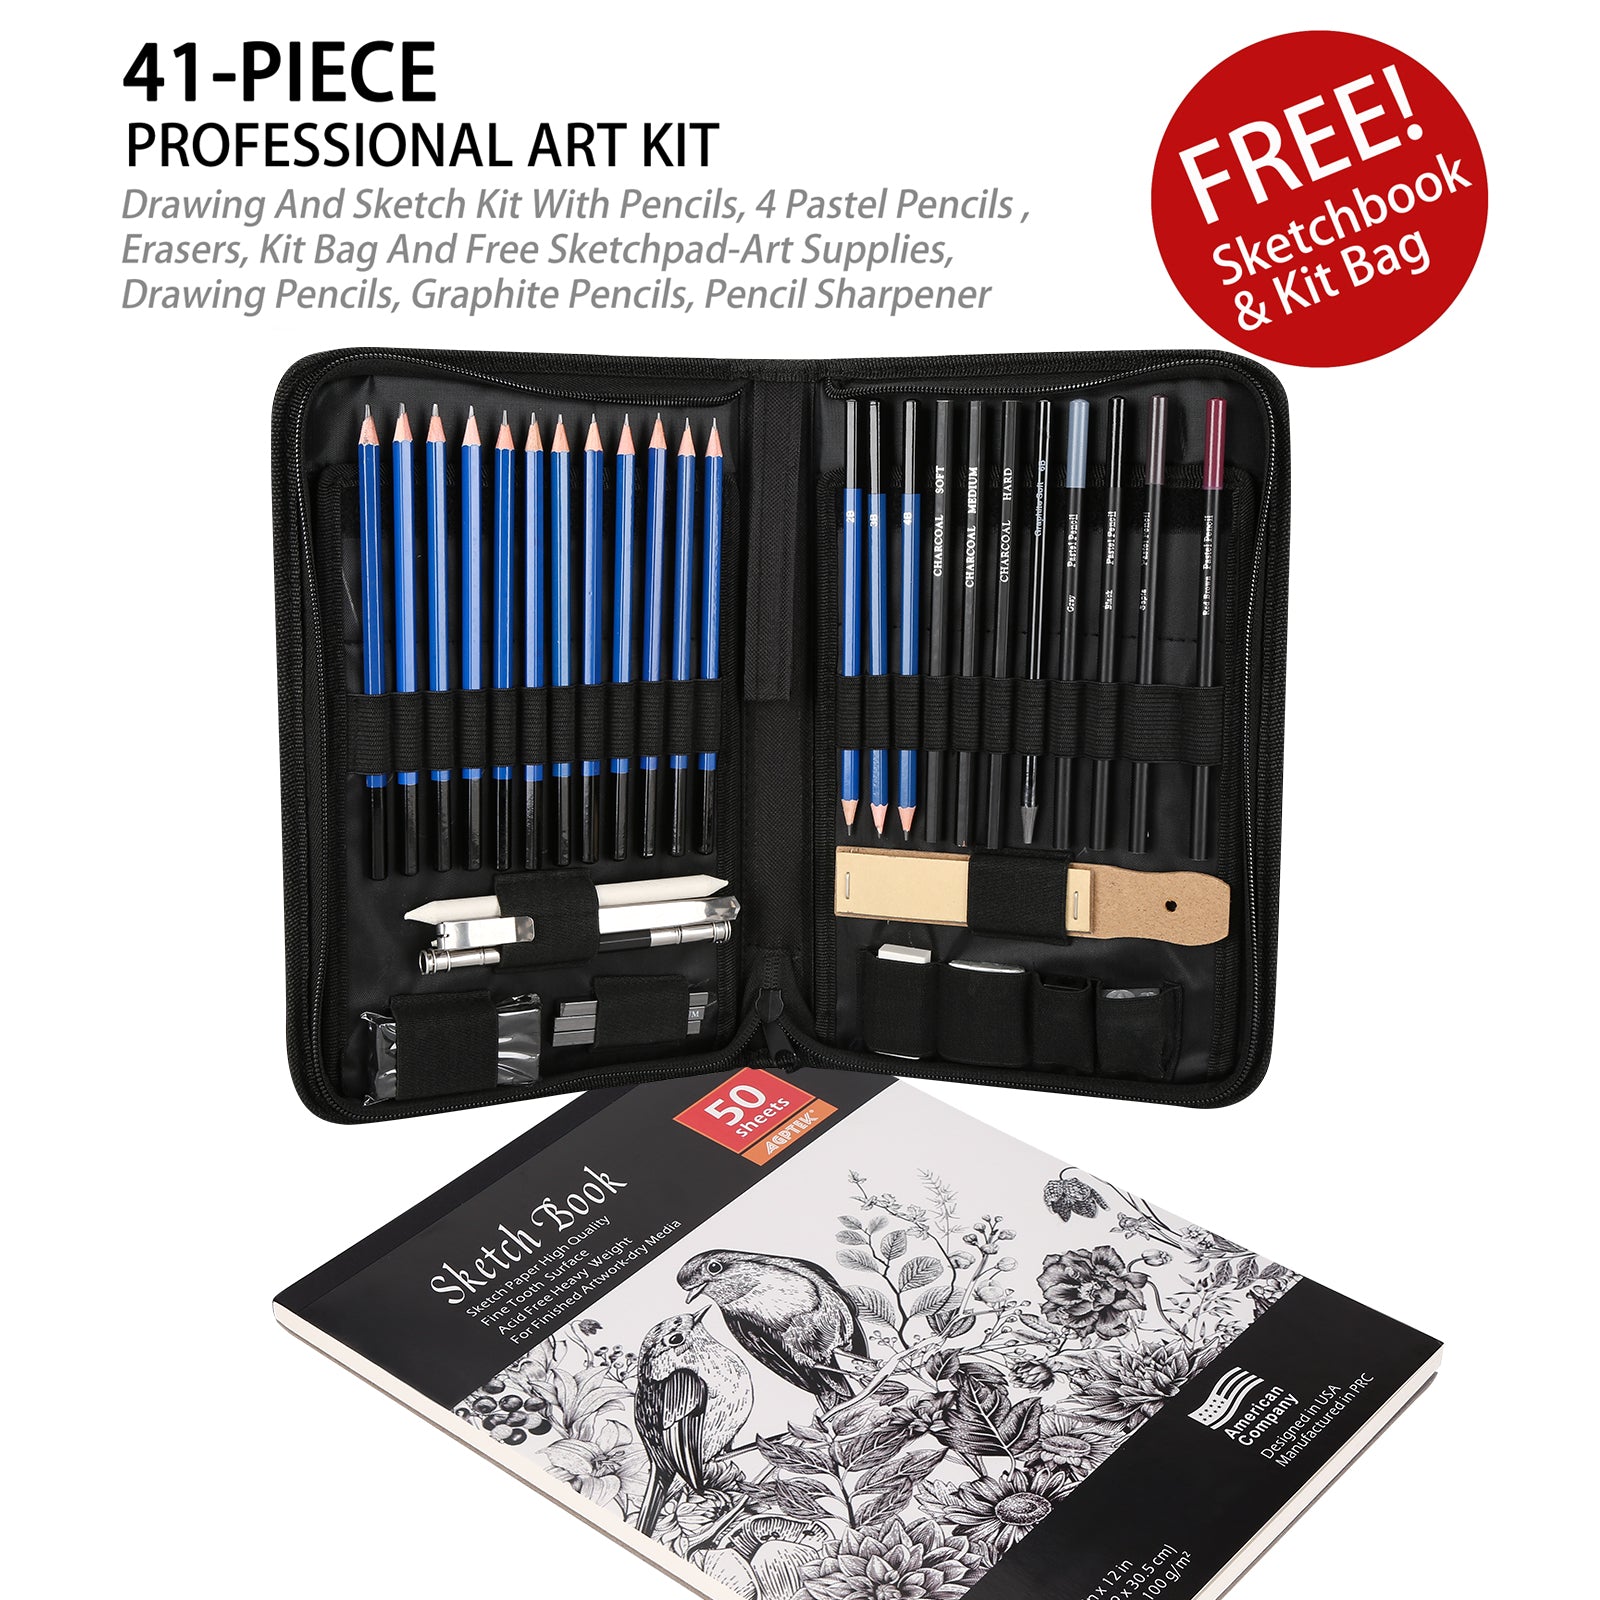 KALOUR 33 Pieces Pro Drawing Kit Sketching Pencils Set,Portable Zippered  Travel Case-Charcoal Pencils, Sketch Pencils, Charcoal  Stick,Sharpener,Eraser.Art Supplies for Artists Beginner Adults Teens